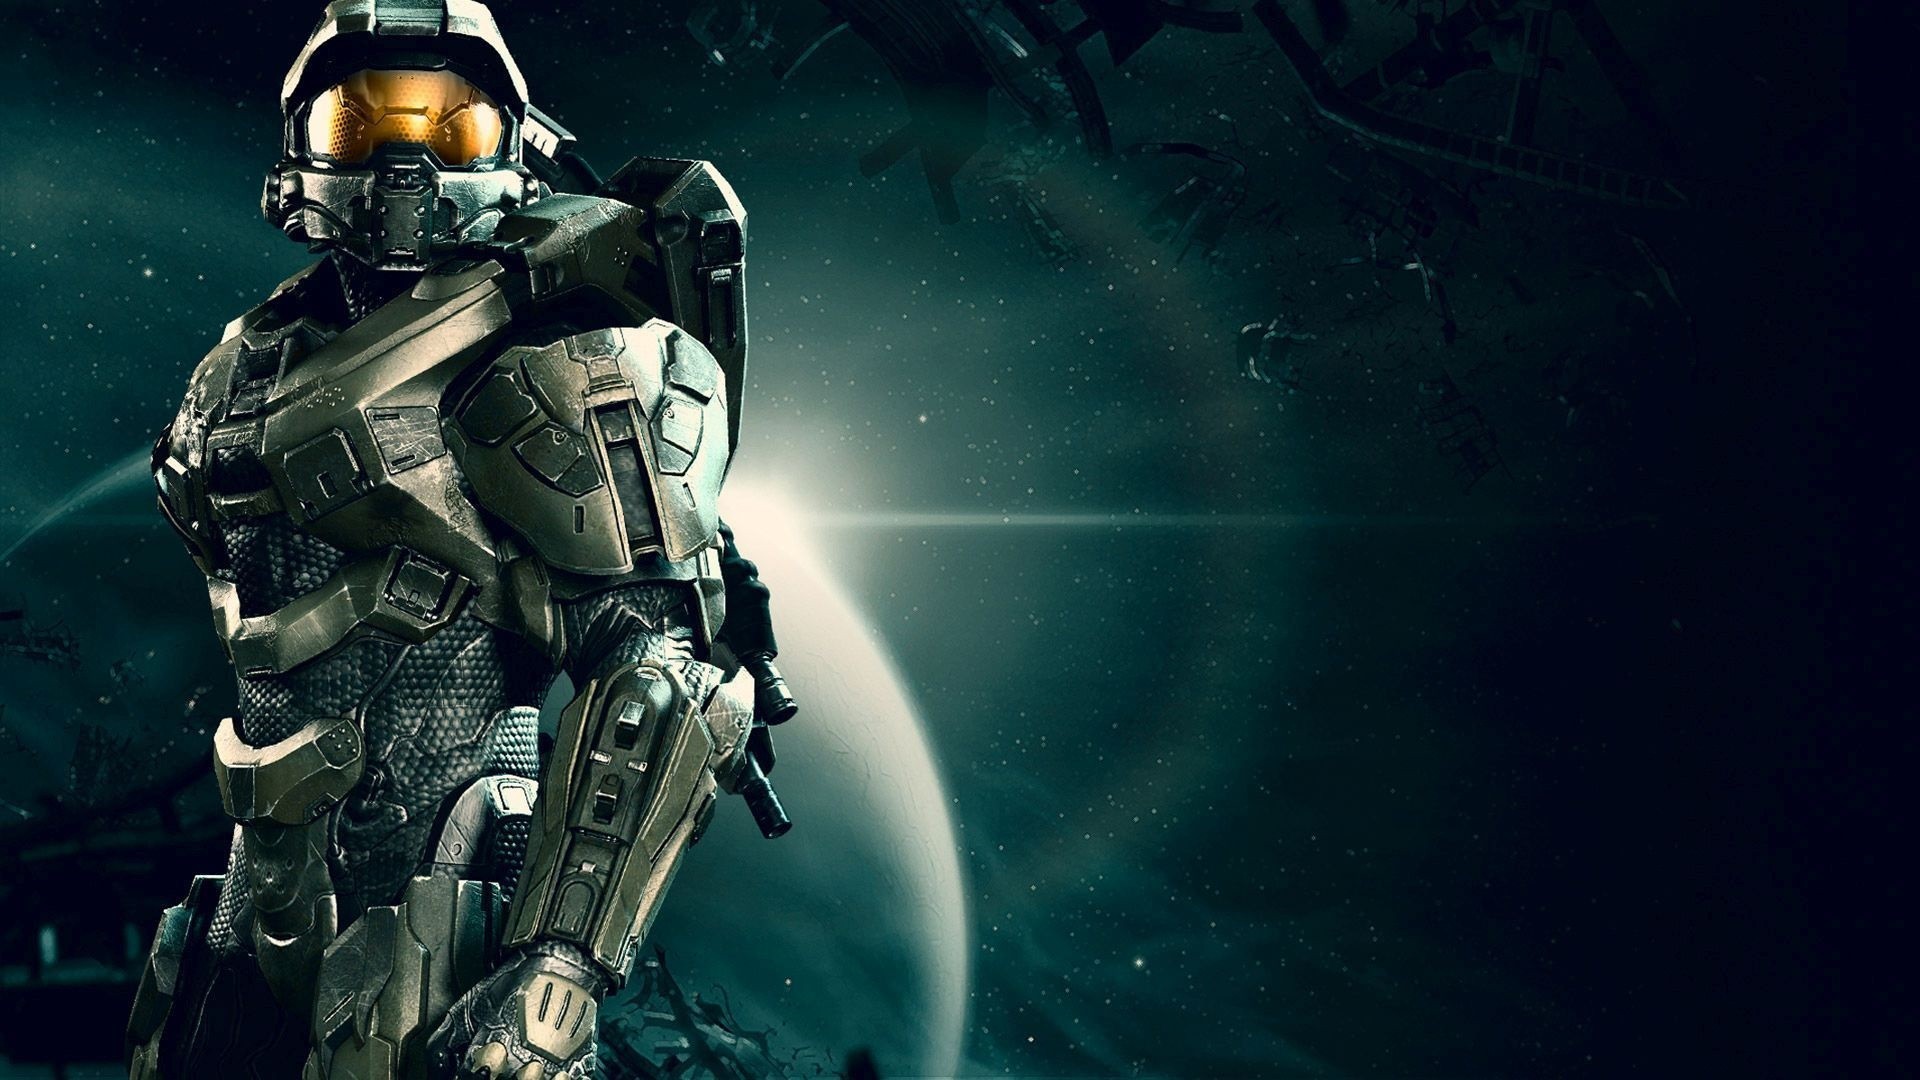 General 1920x1080 video games Halo 4 UNSC Infinity 343 Industries Xbox One Spartans (Halo) science fiction video game art Master Chief (Halo) video game characters armor